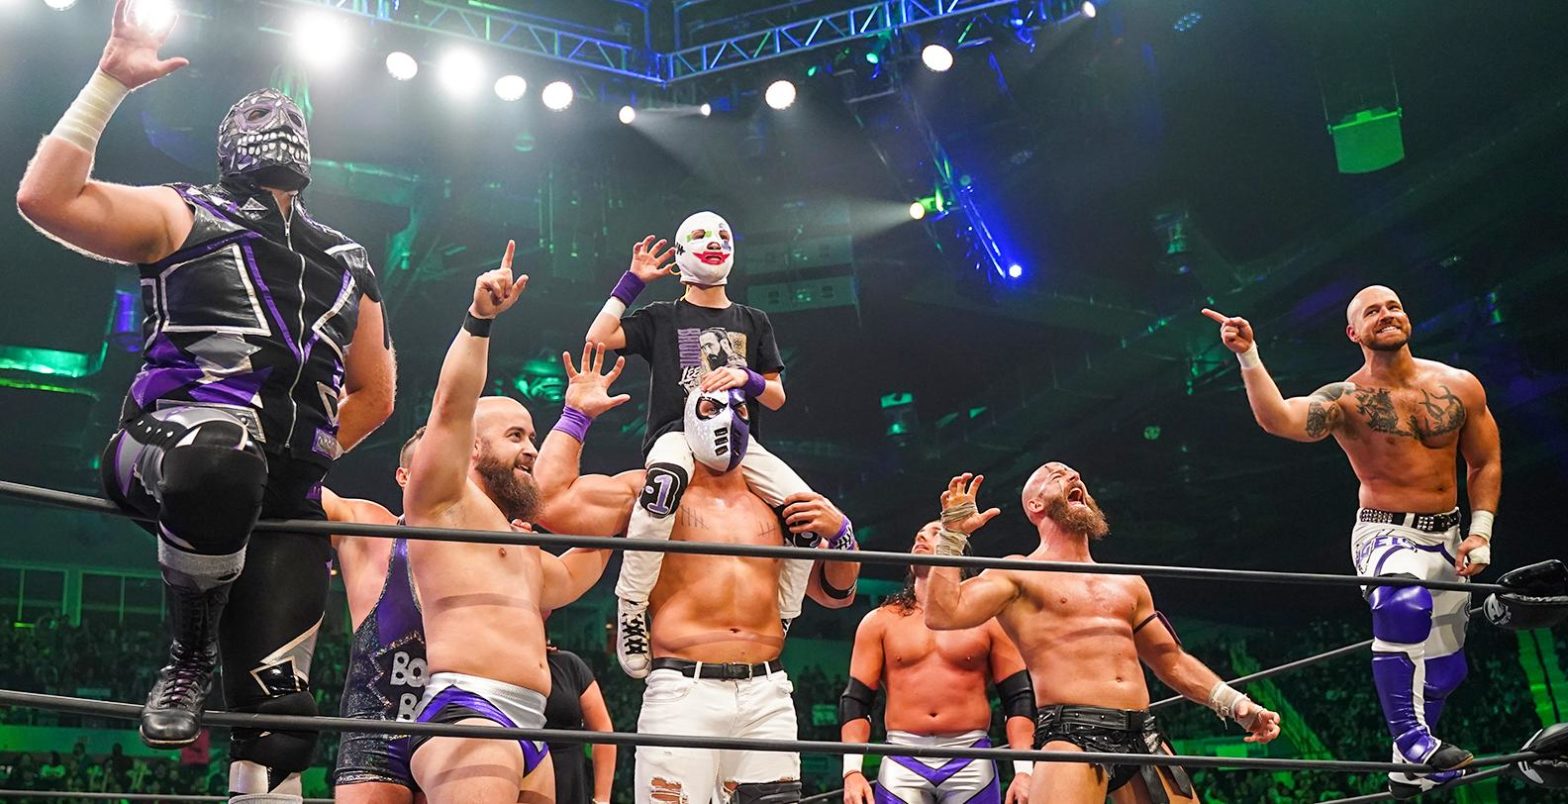 AEW Dynamite Viewership And Key Demo Rating Down From Last Week With TNT Title Main Event